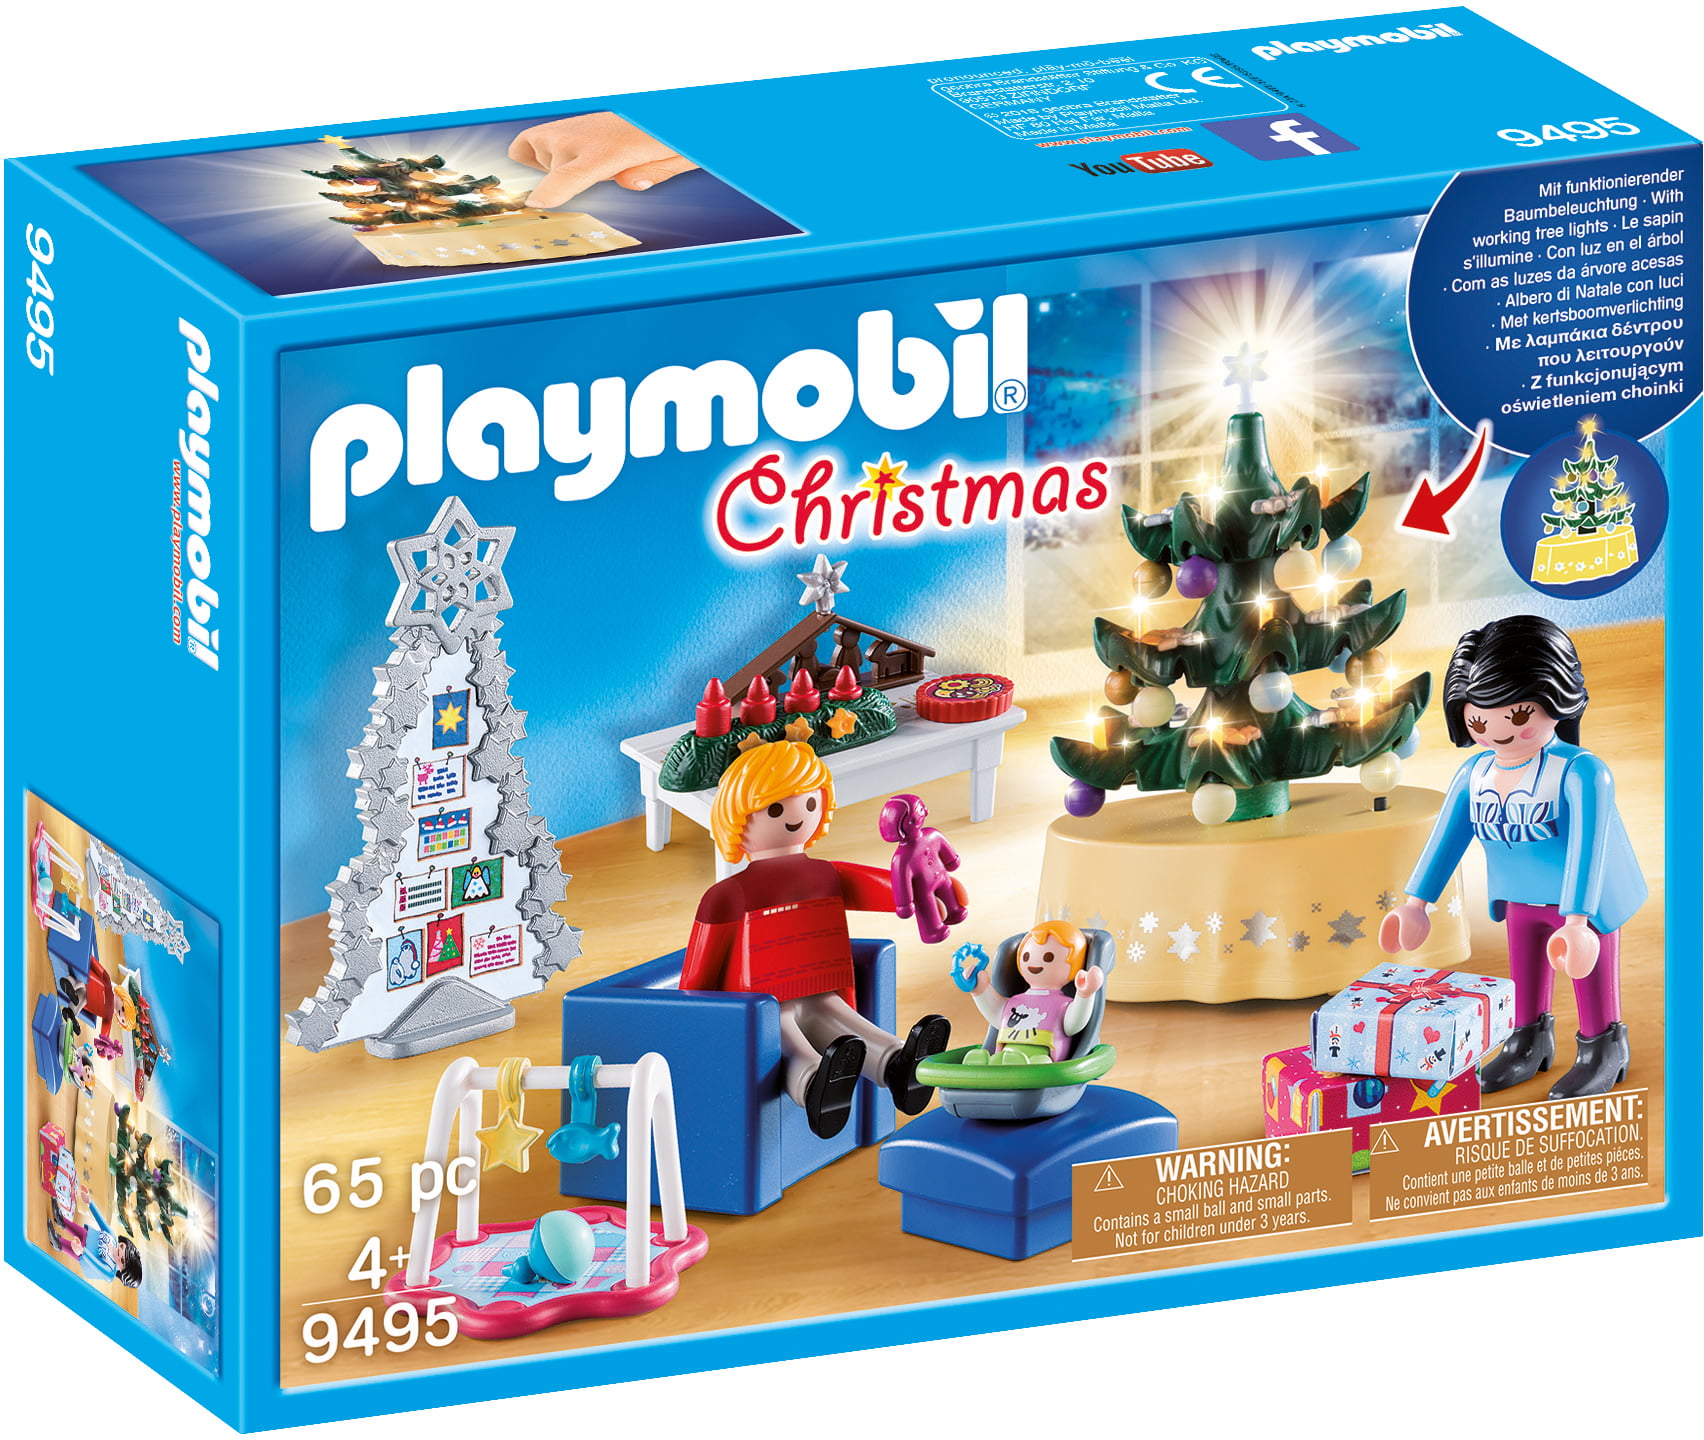 play mobil sets